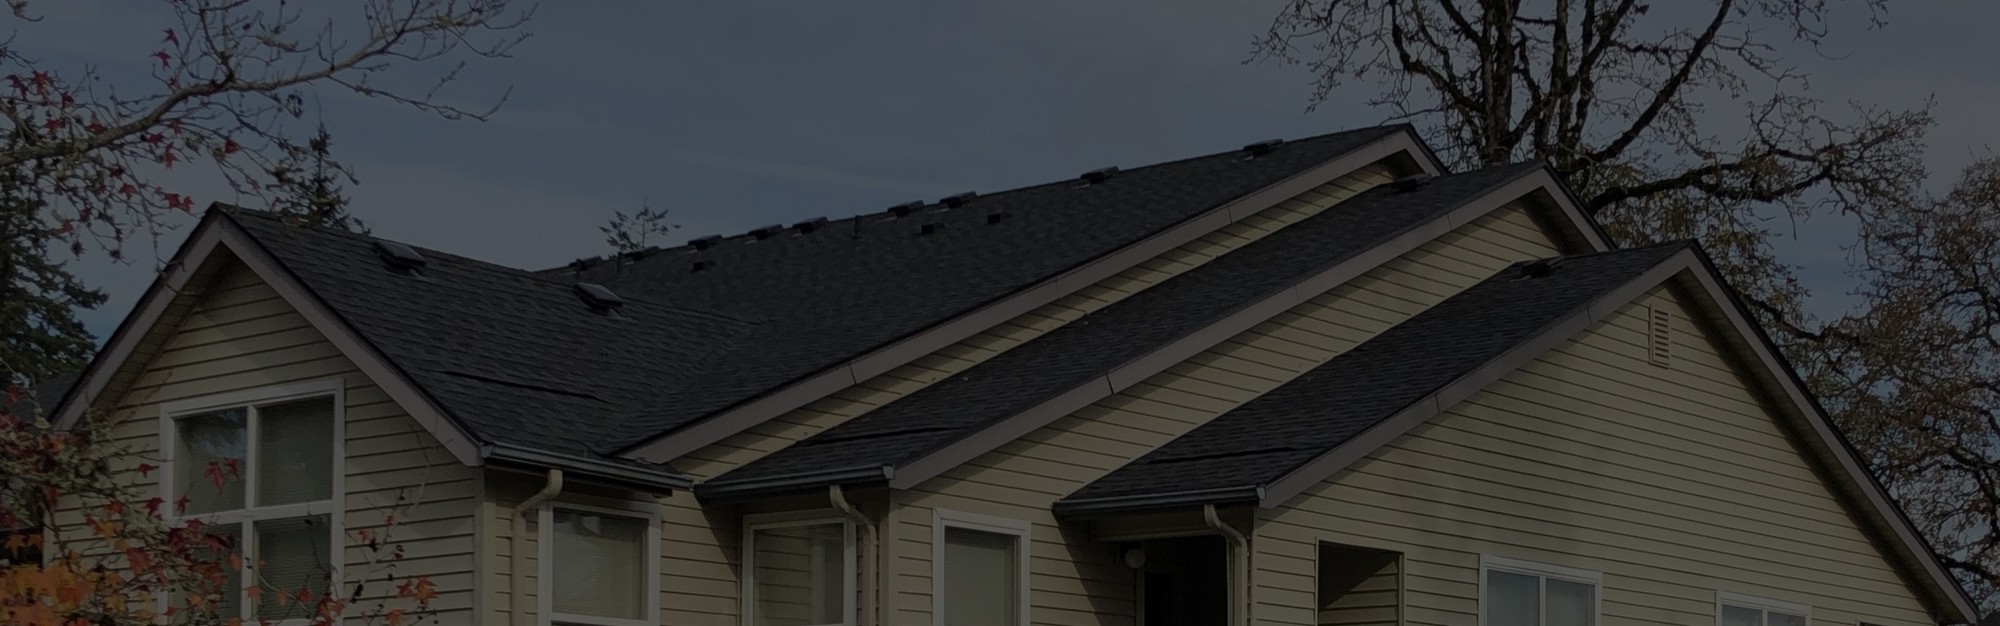 Oregon roof replacement and installation prices